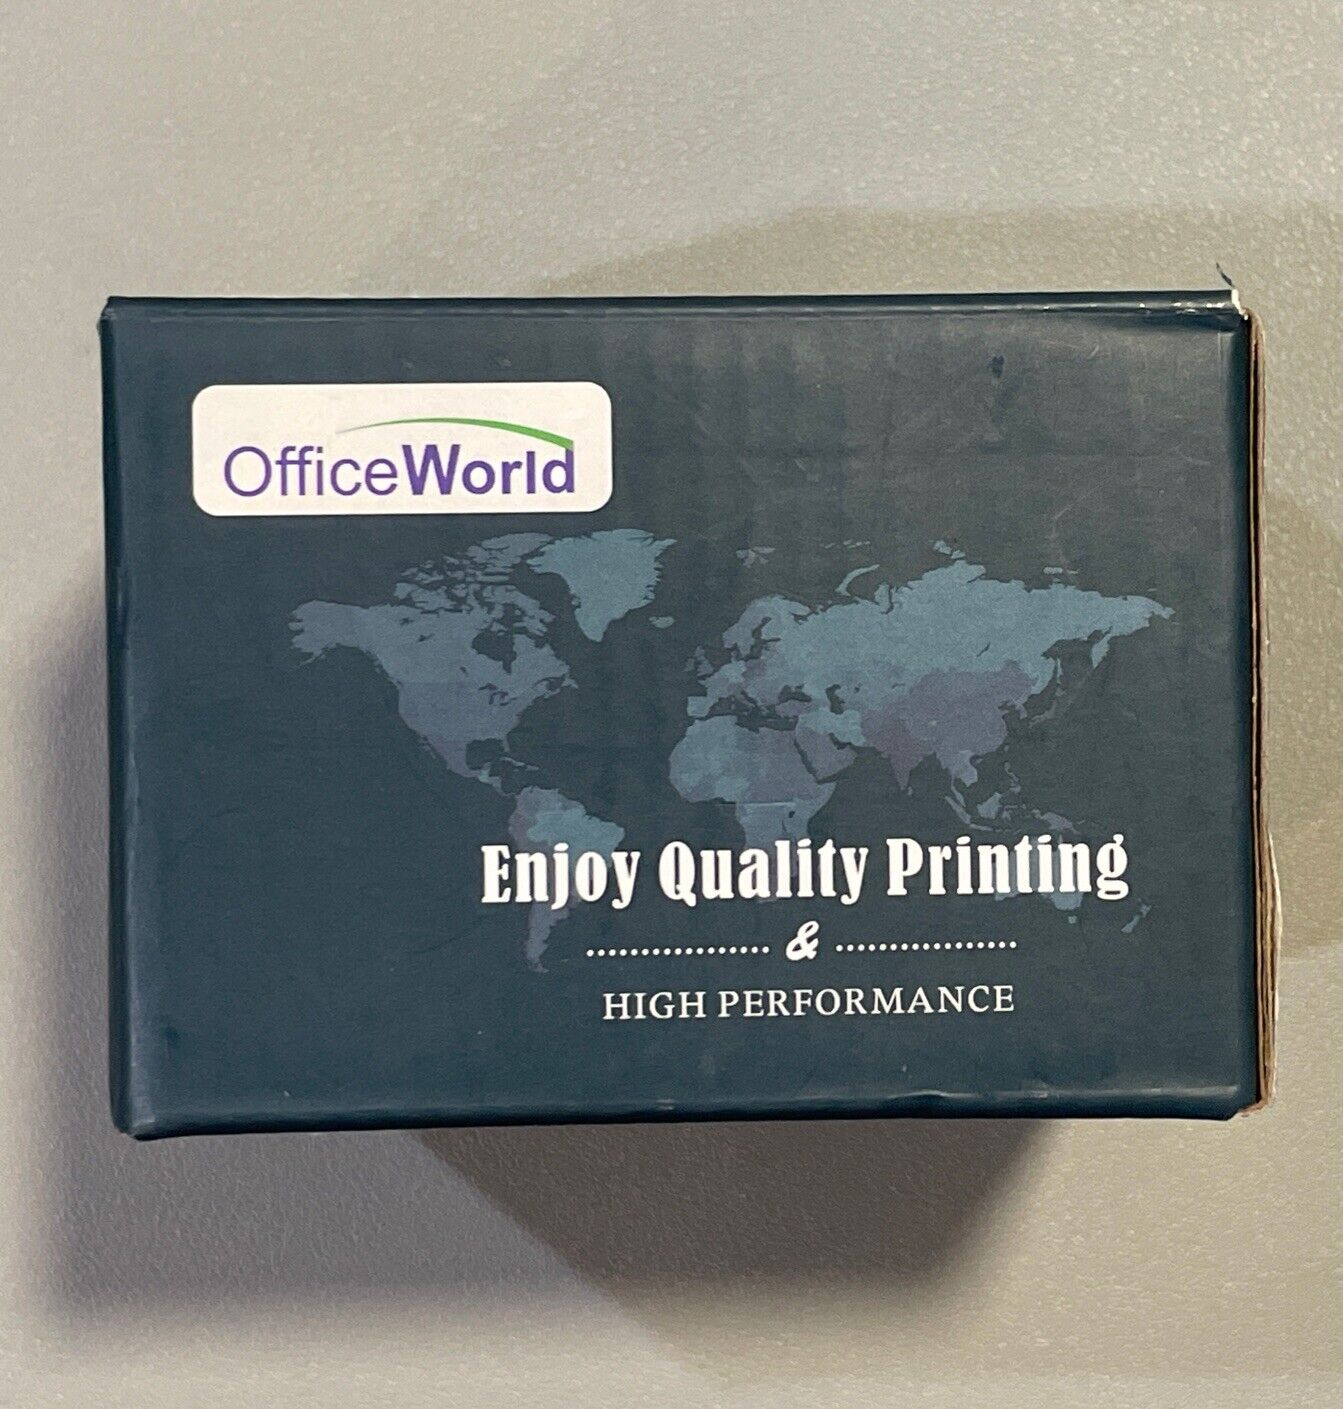 Office World Ink. Enjoy Quality Printing & High Performance. Exp. 2019